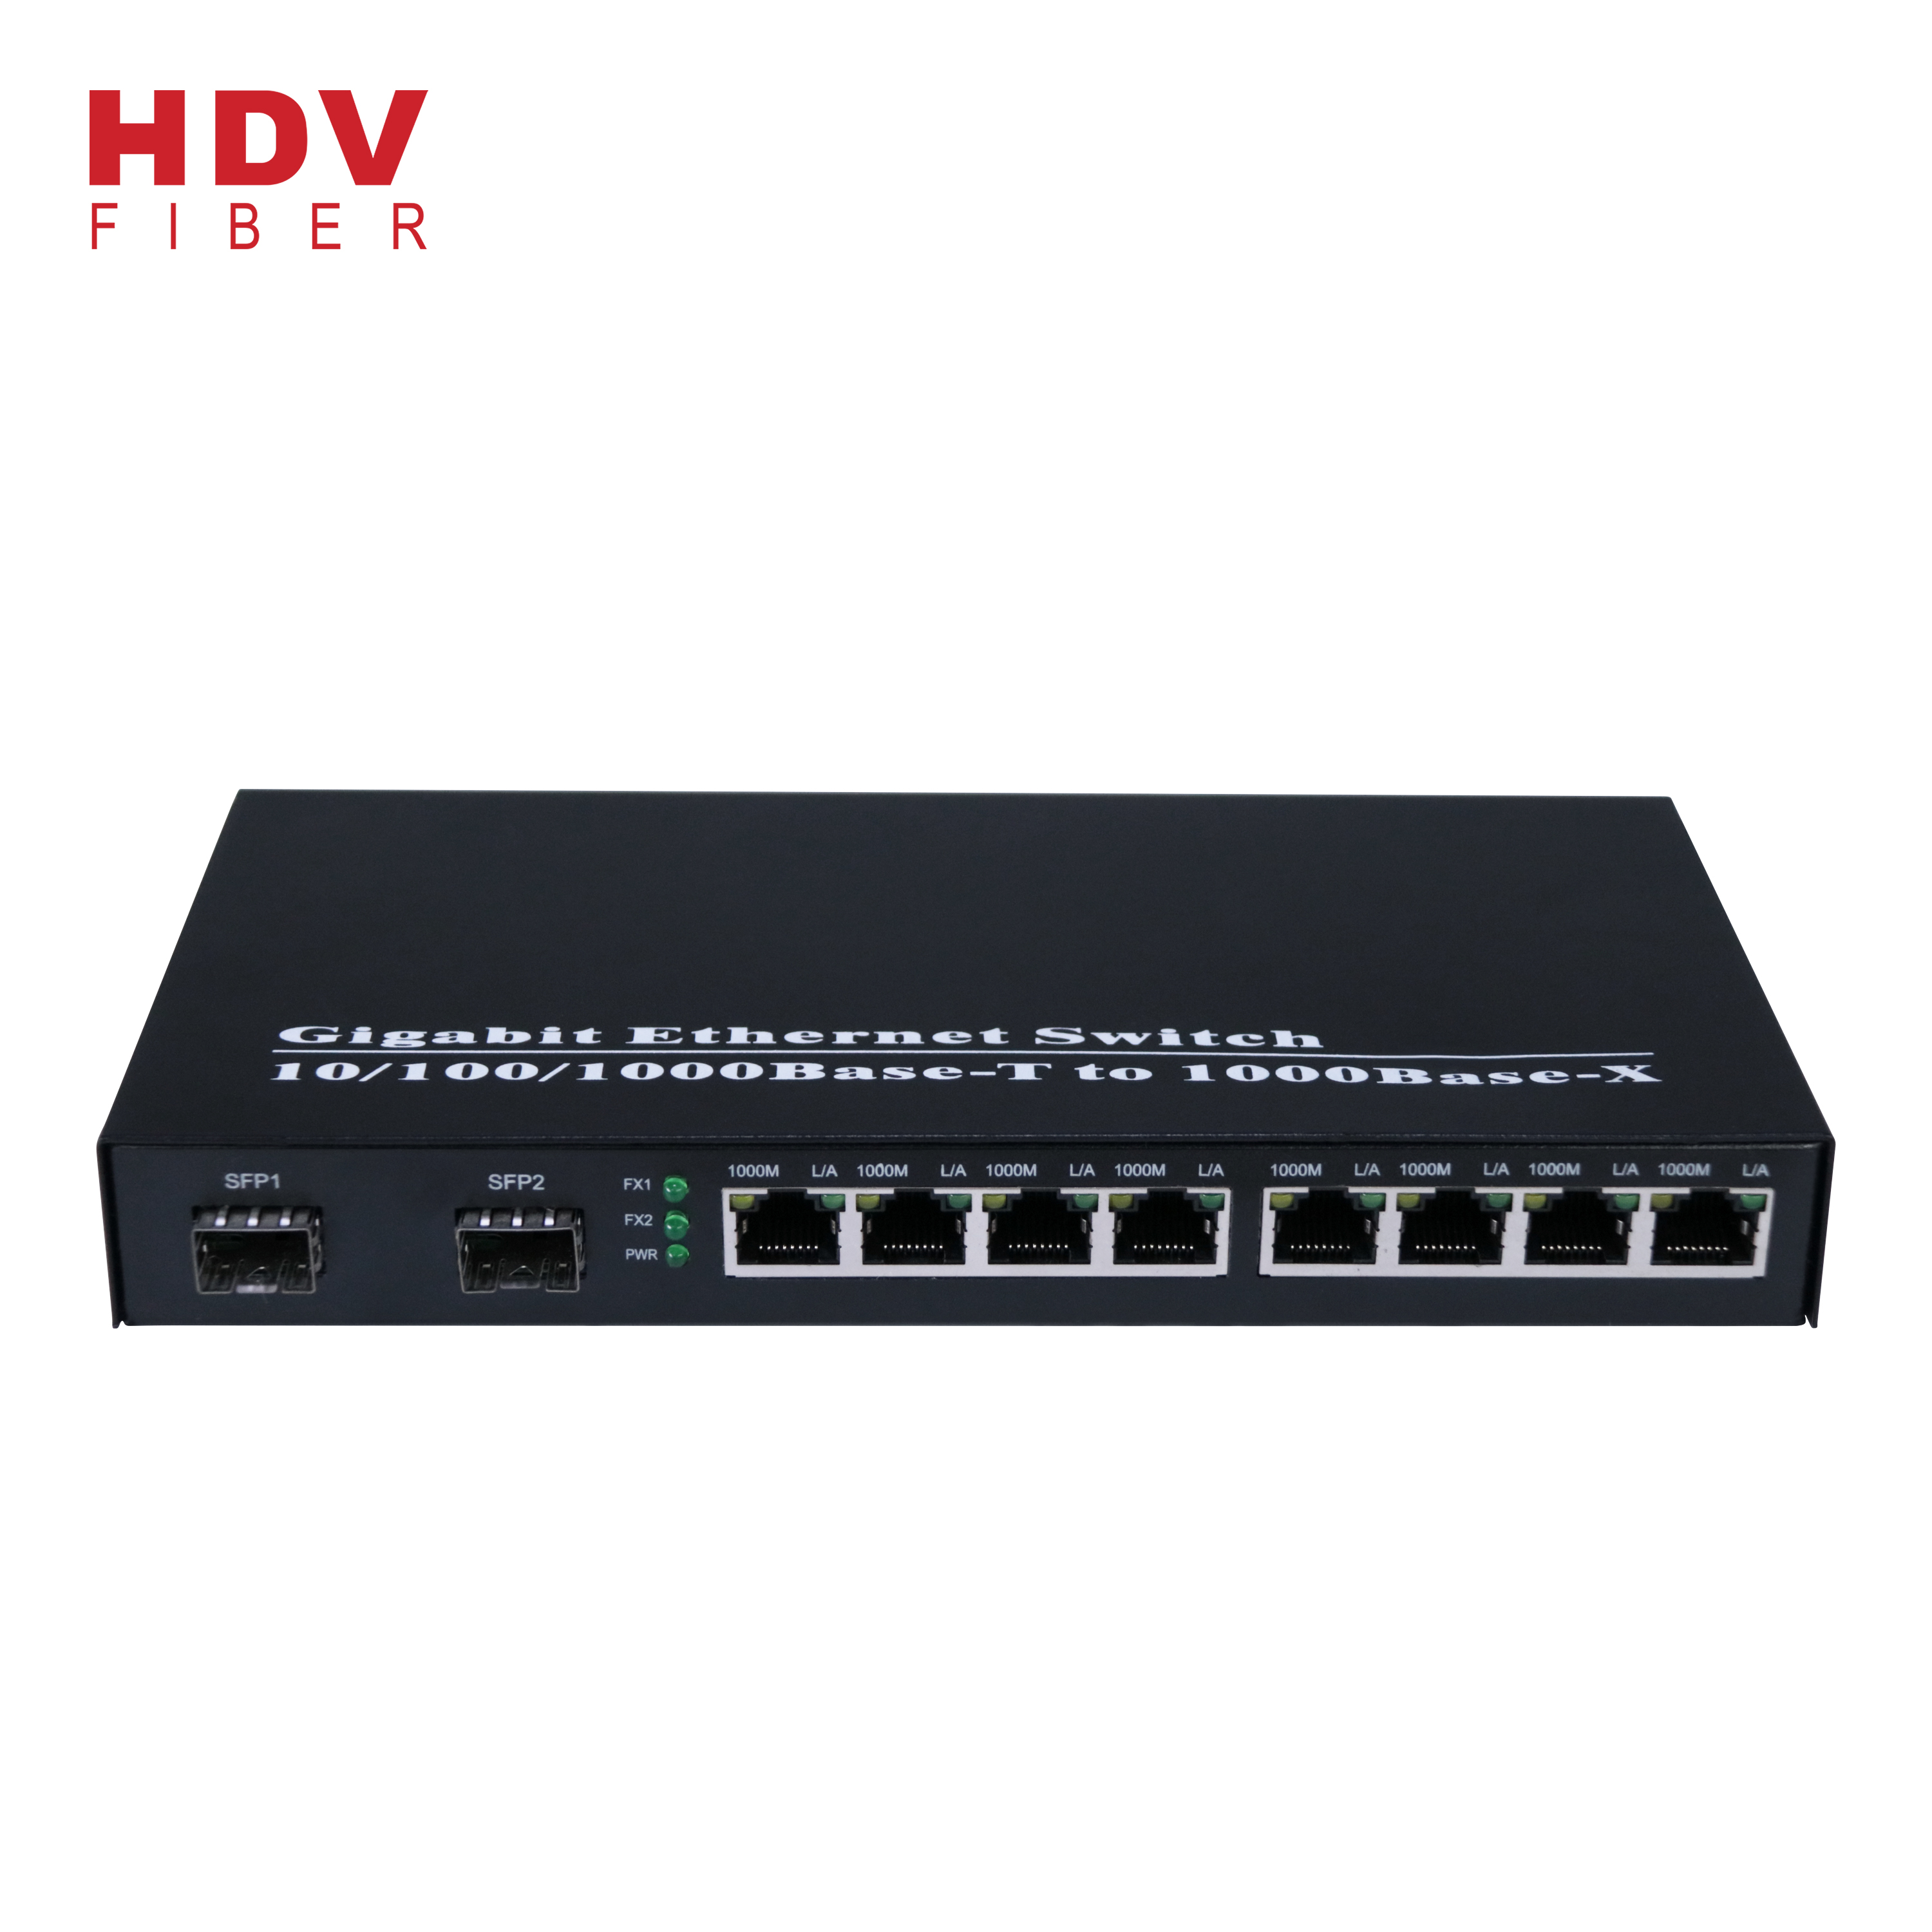 2019 High quality 4 Port Managed Industrial Switch - China Supplier 2 SFP Port 8 Ethernet Ports Optic Fiber Switch 10/100/1000M Media Converter – HDV